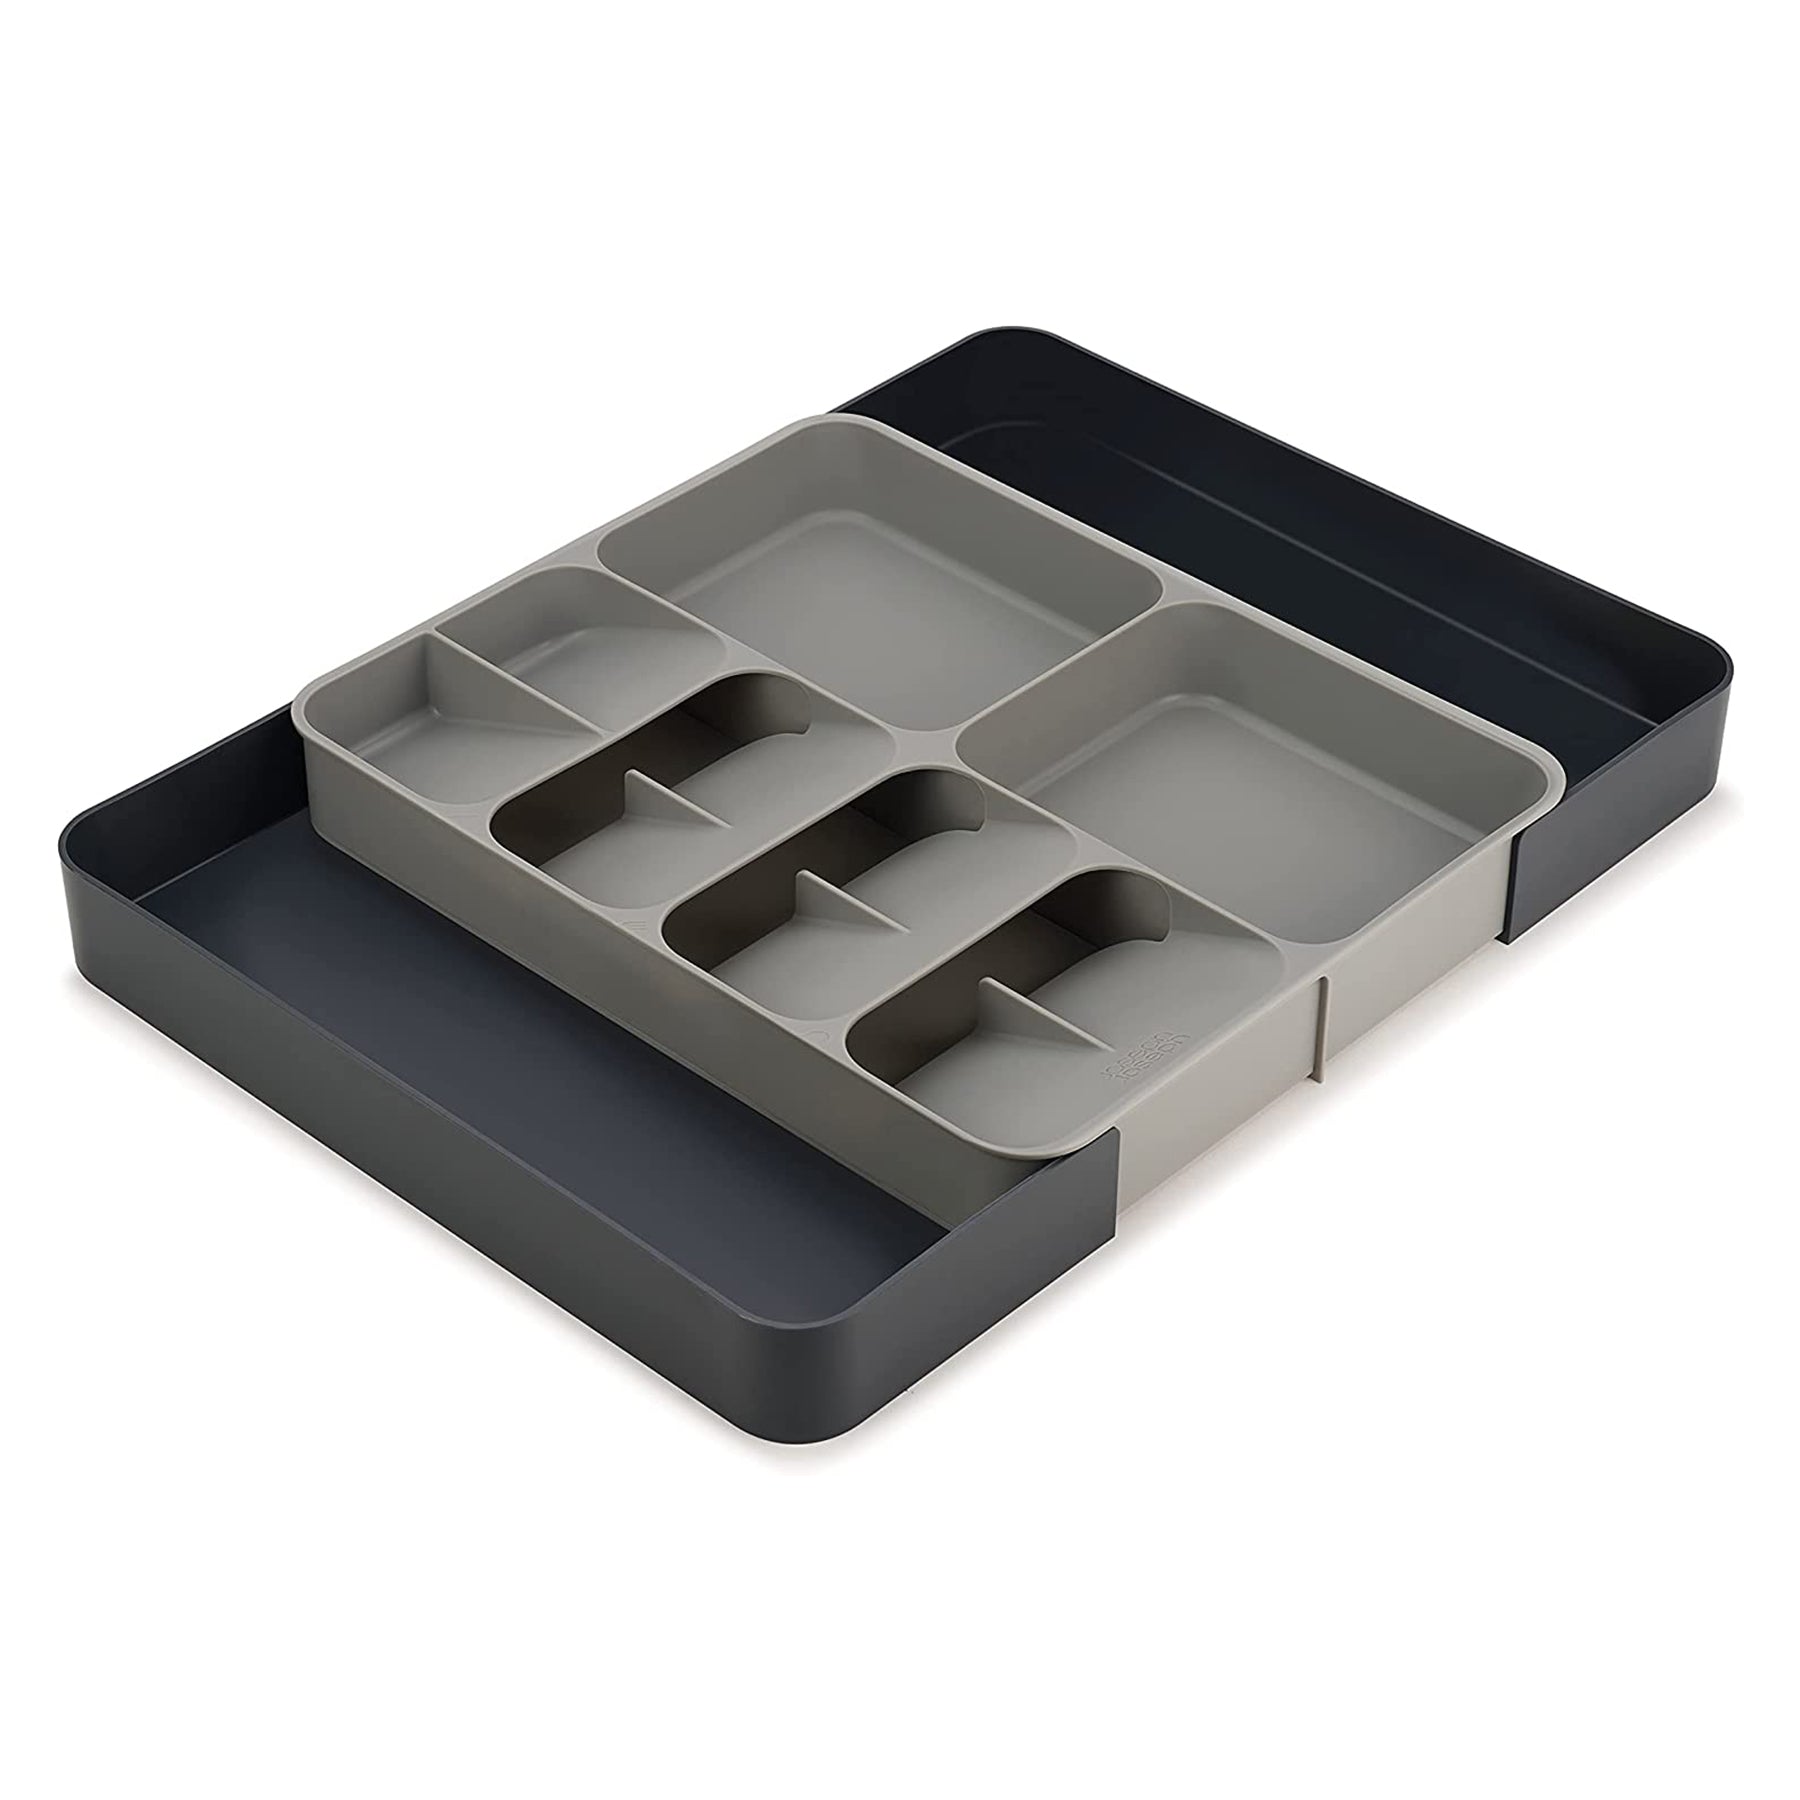 2 Layer folding cutlery holder - Grey Color